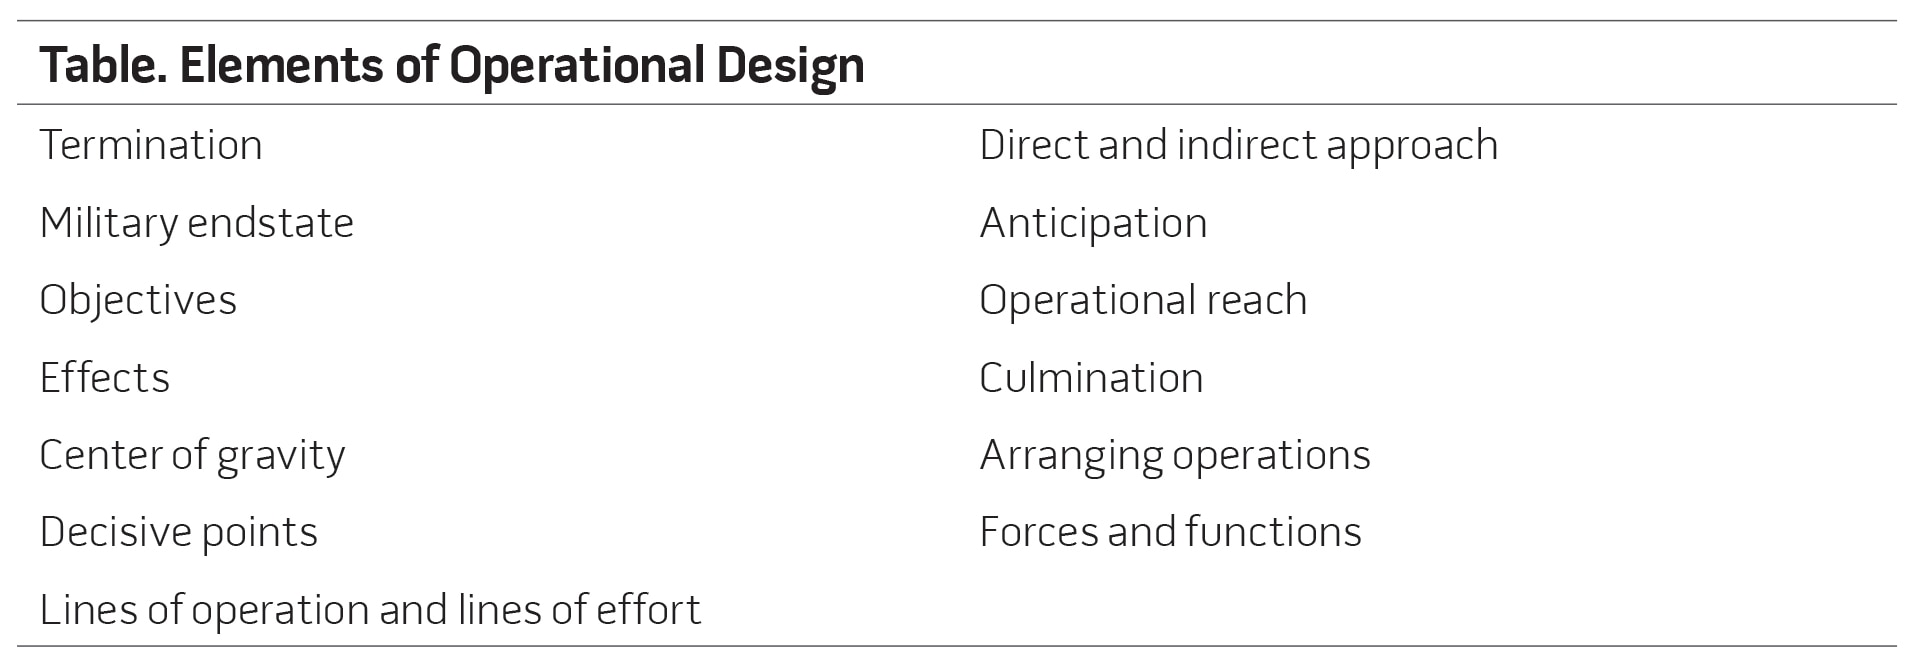 Table. Elements of Operational Design